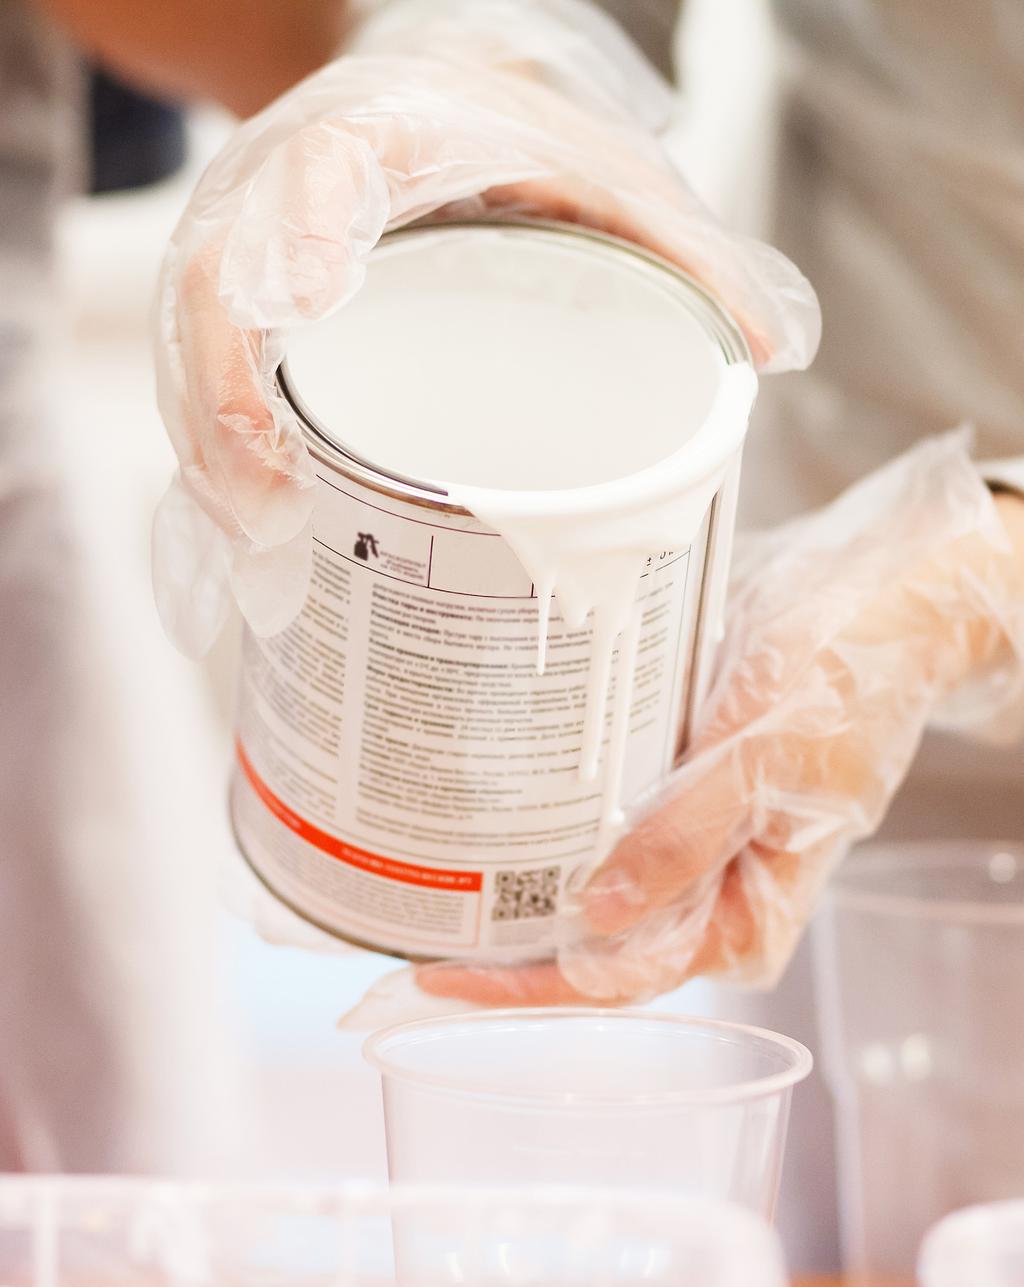 Other Paint Considerations There are 2 other important factors to consider when choosing a paint: Low-volatile organic compounds (VOCs).